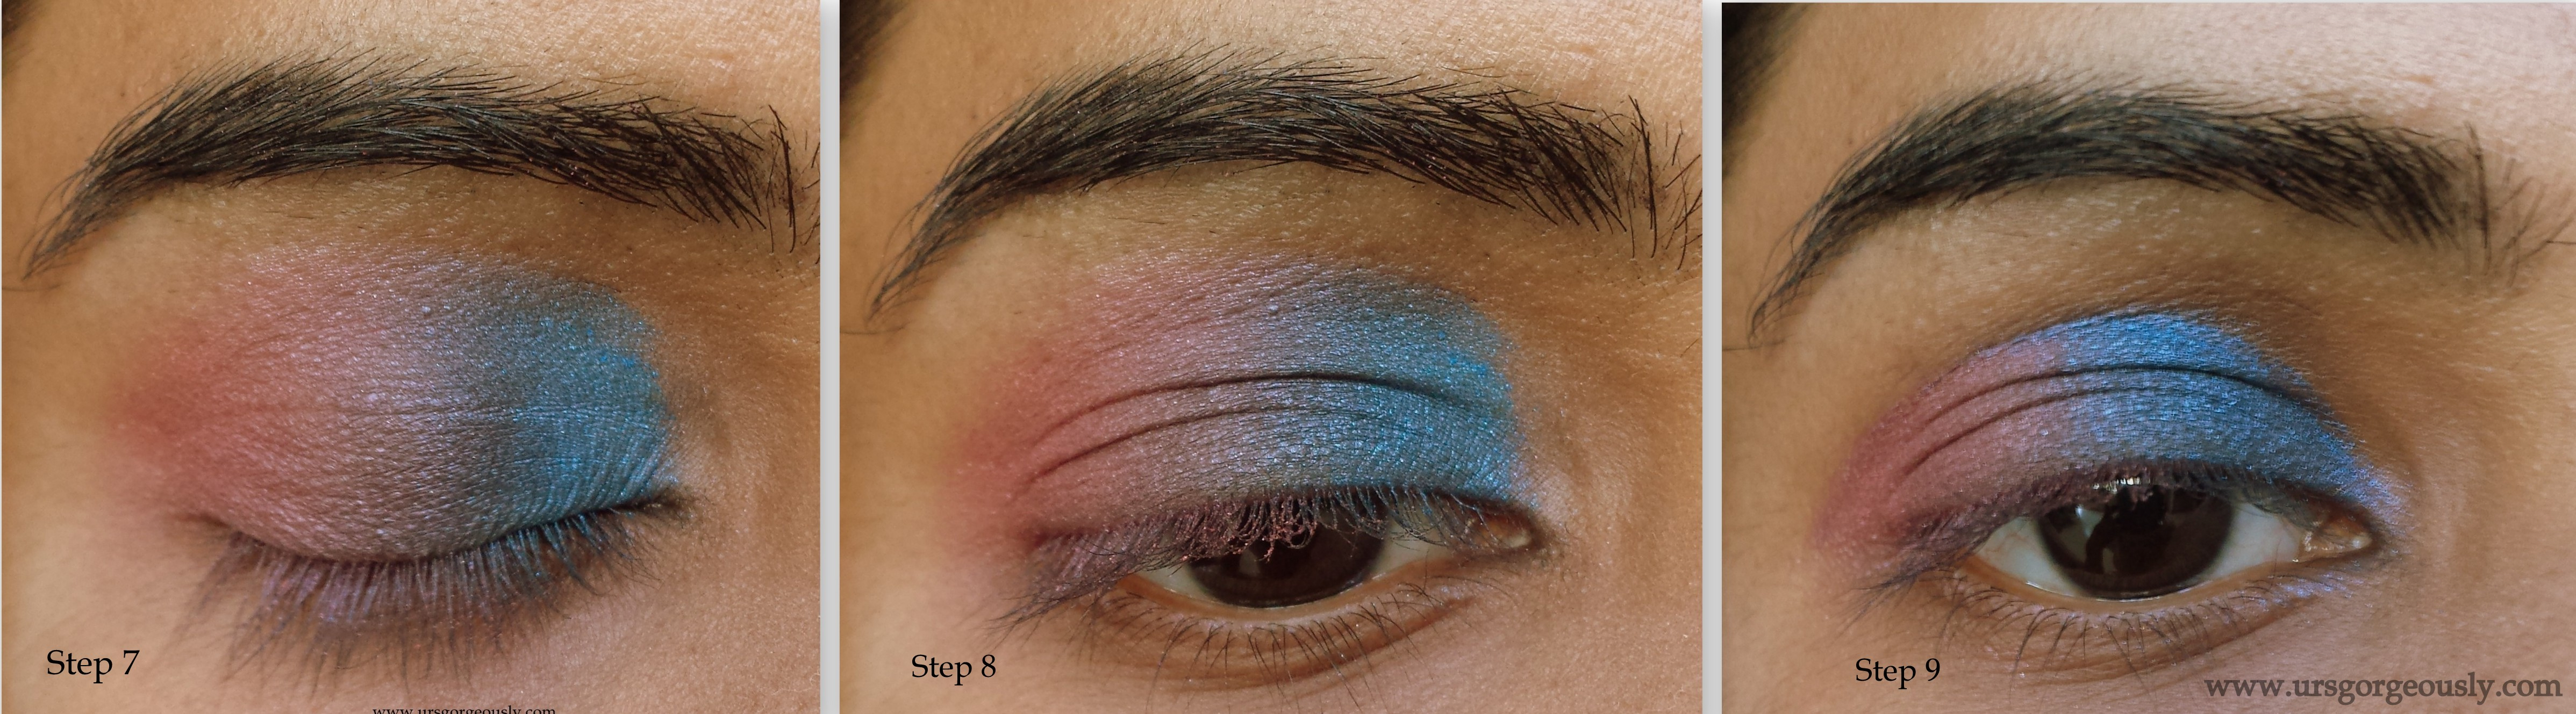 Simple Makeup For Blue Eyes Simple Blue And Pink Eye Makeup Tutorial With Mua Pro Immaculate